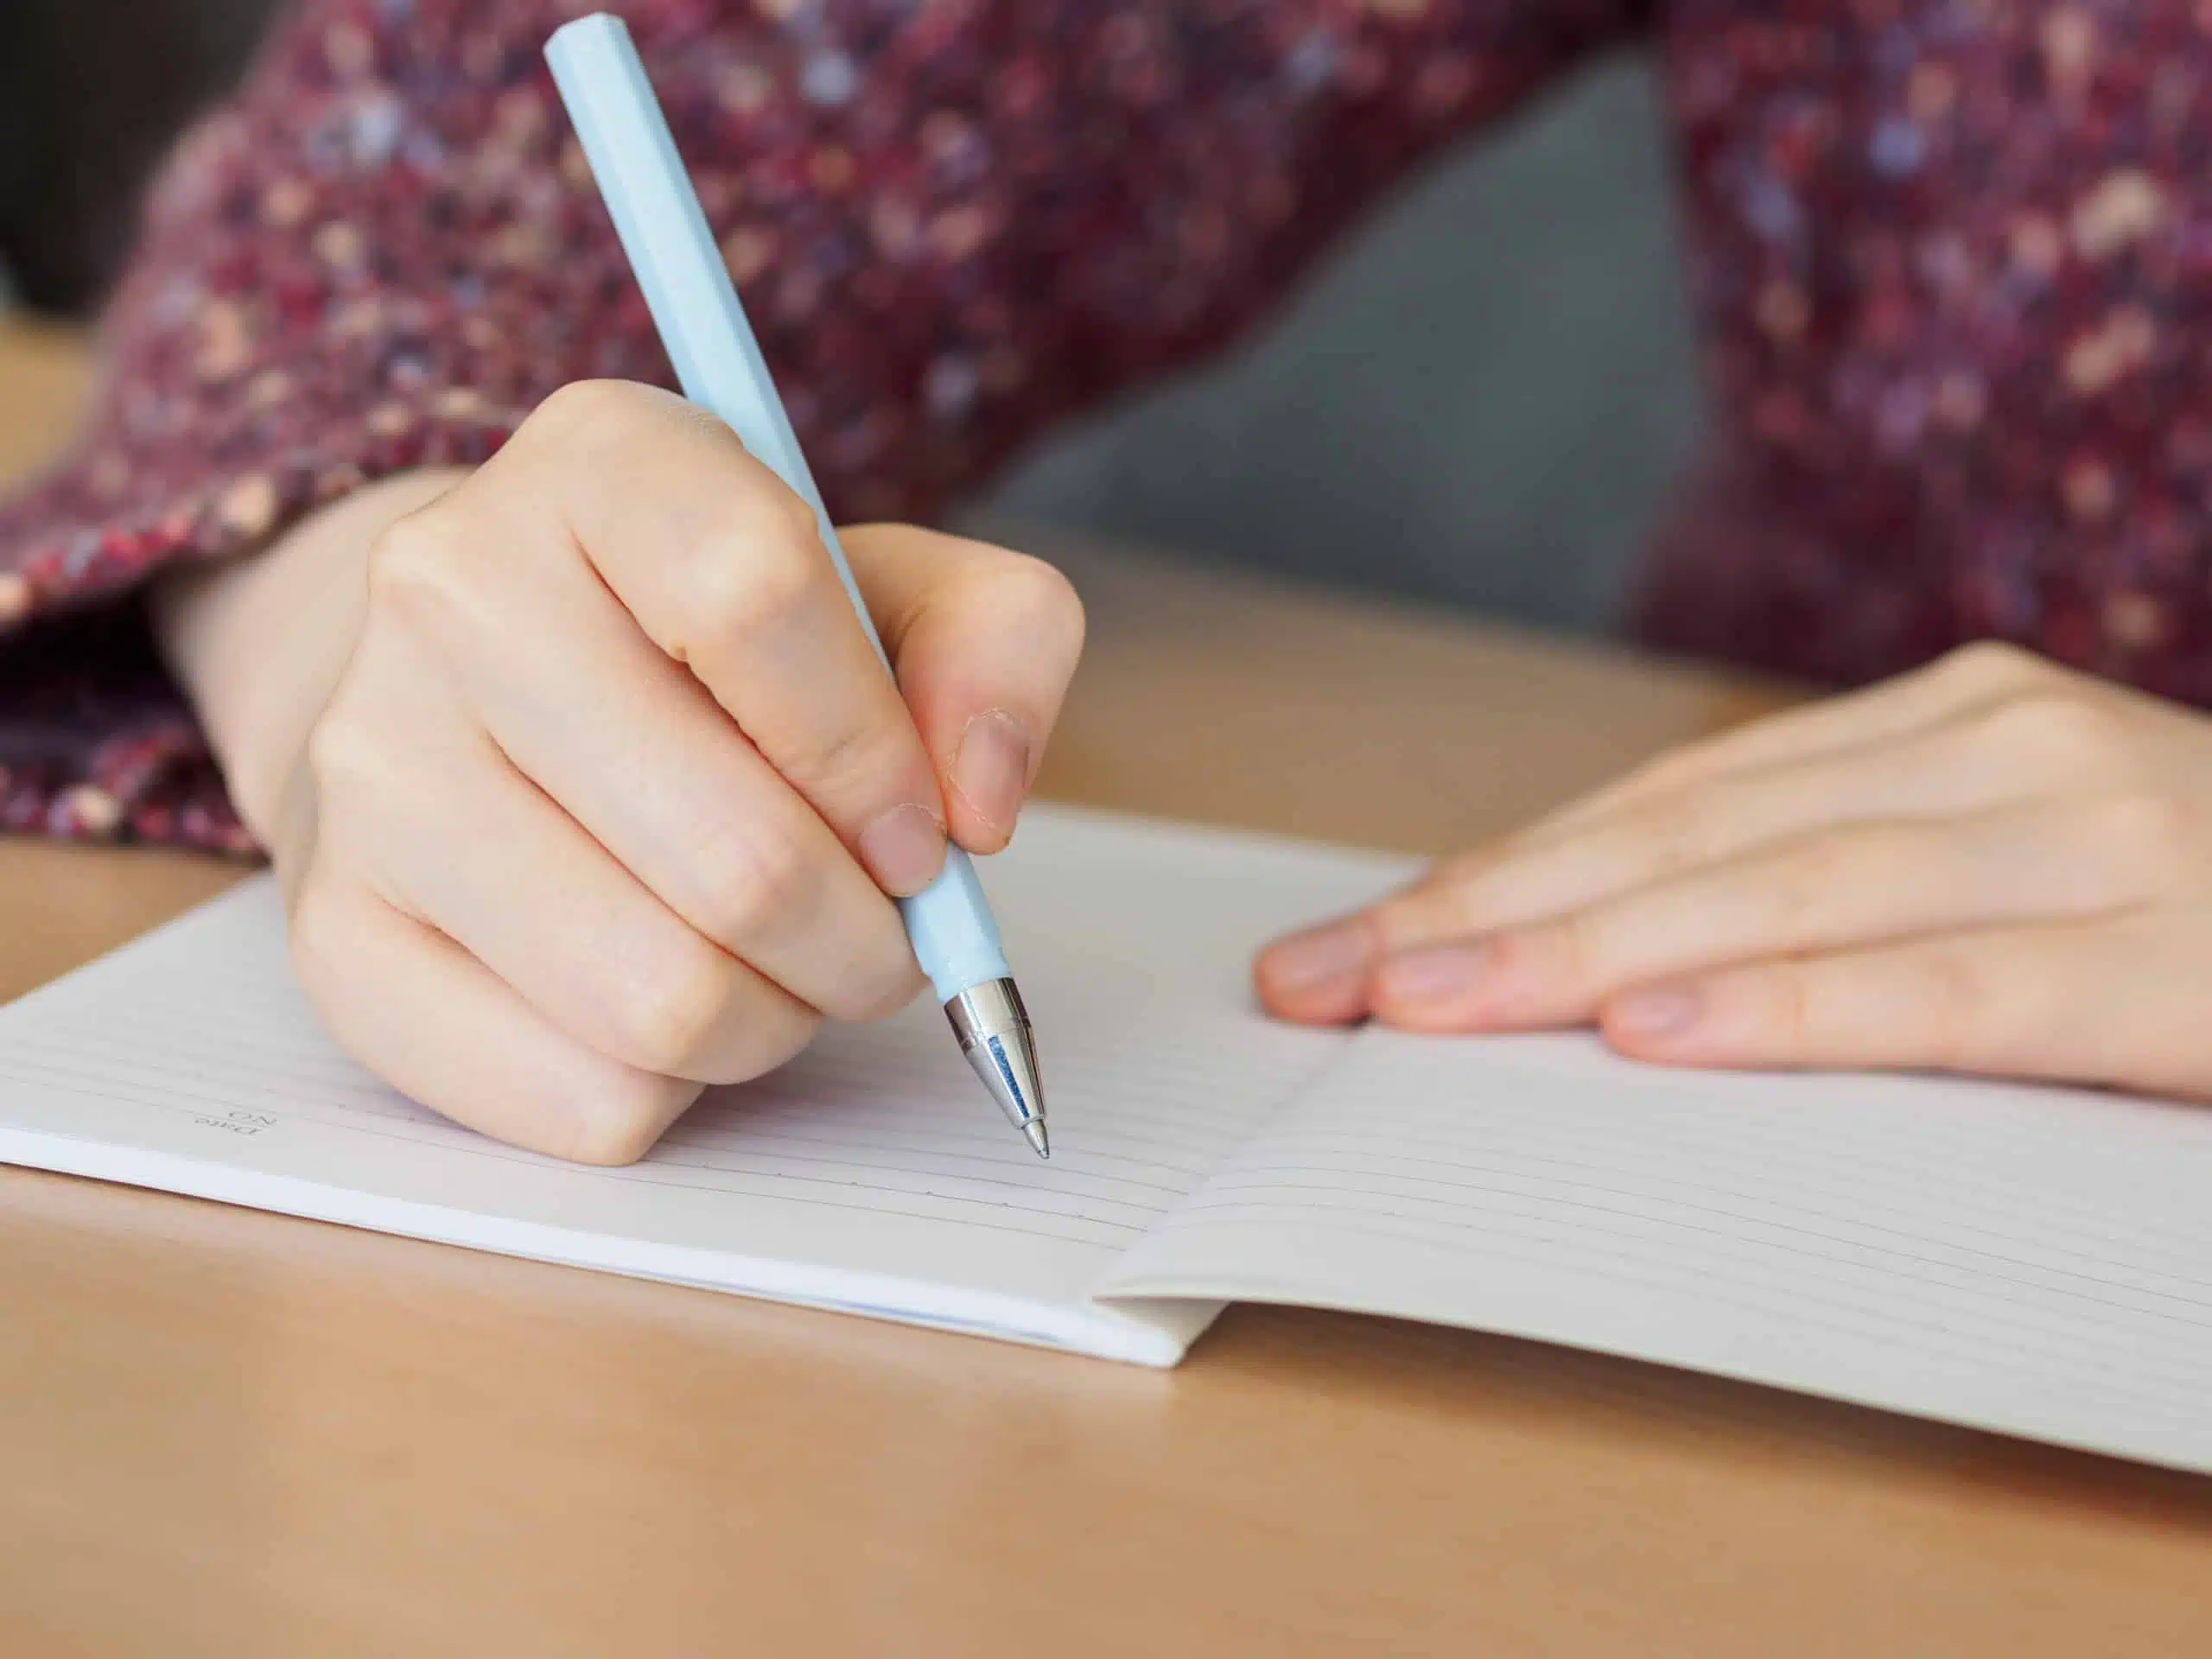 Woman's hands writing in notepad on wooden desk.